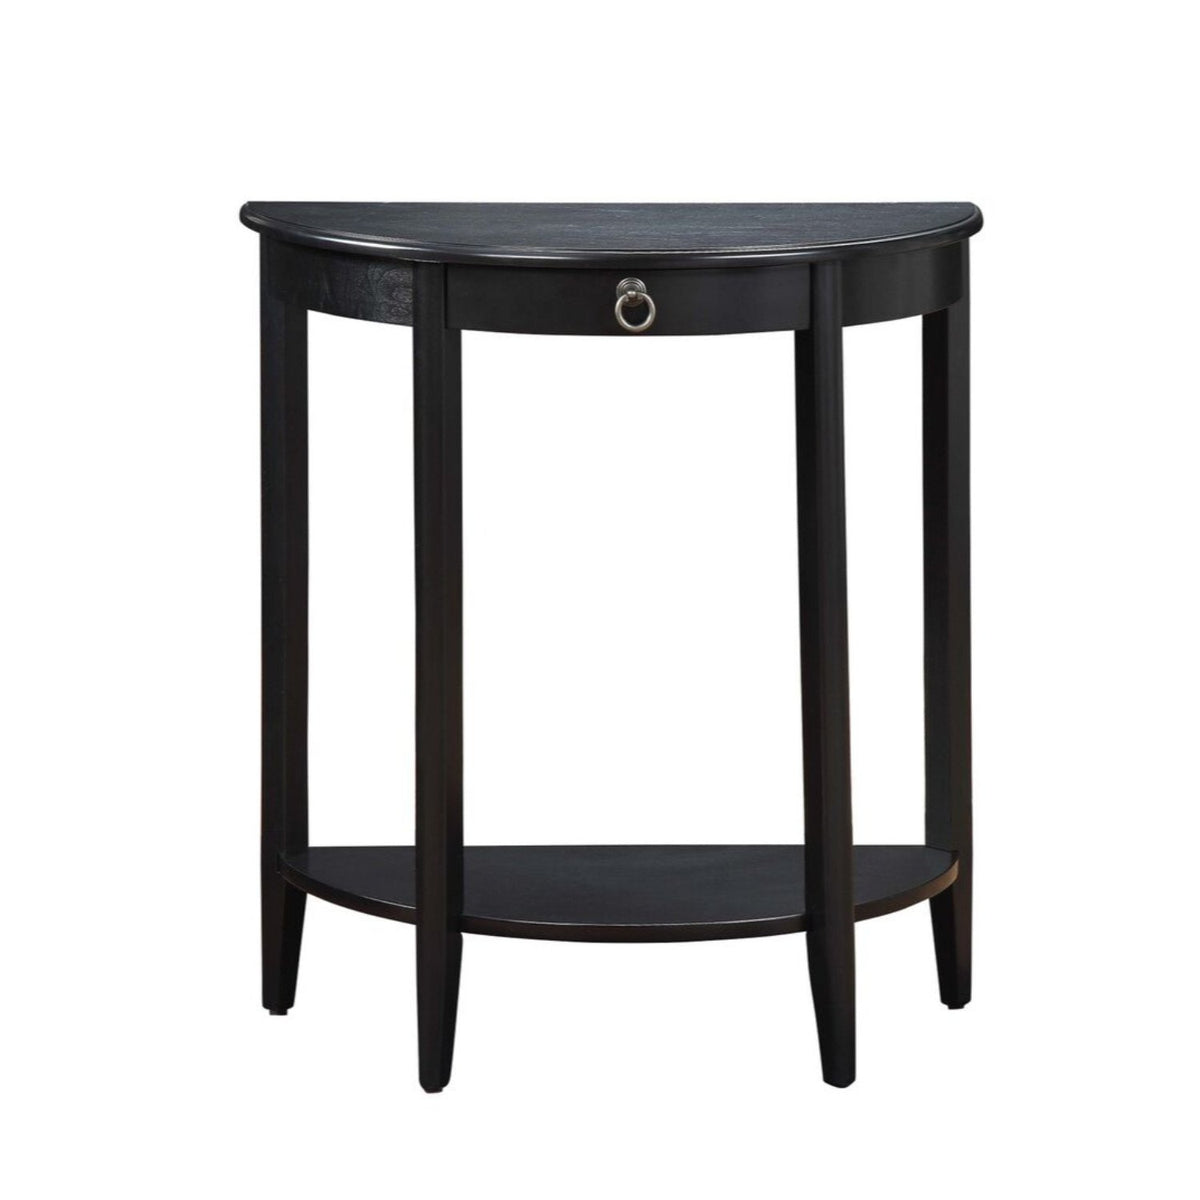 BM191266 - Wooden Half Moon Shaped Console Table with One Storage Drawer, Black